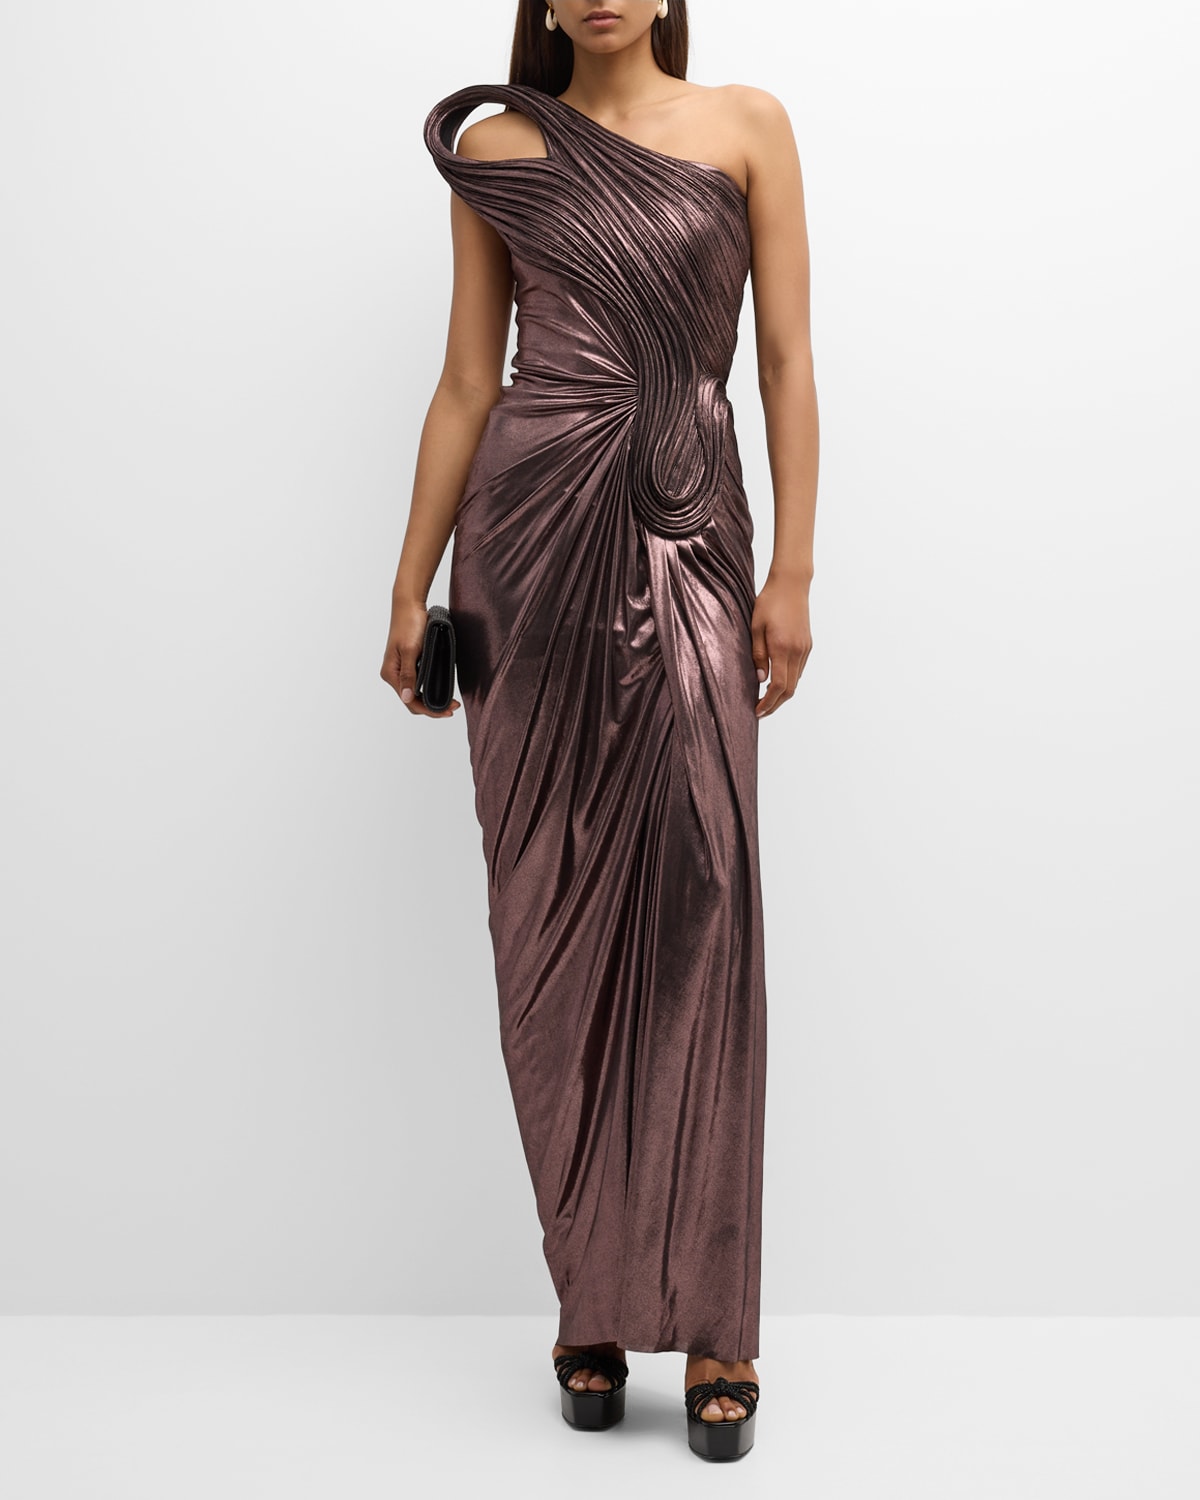 The Infinite Sculpted One-Shoulder Draped Gown